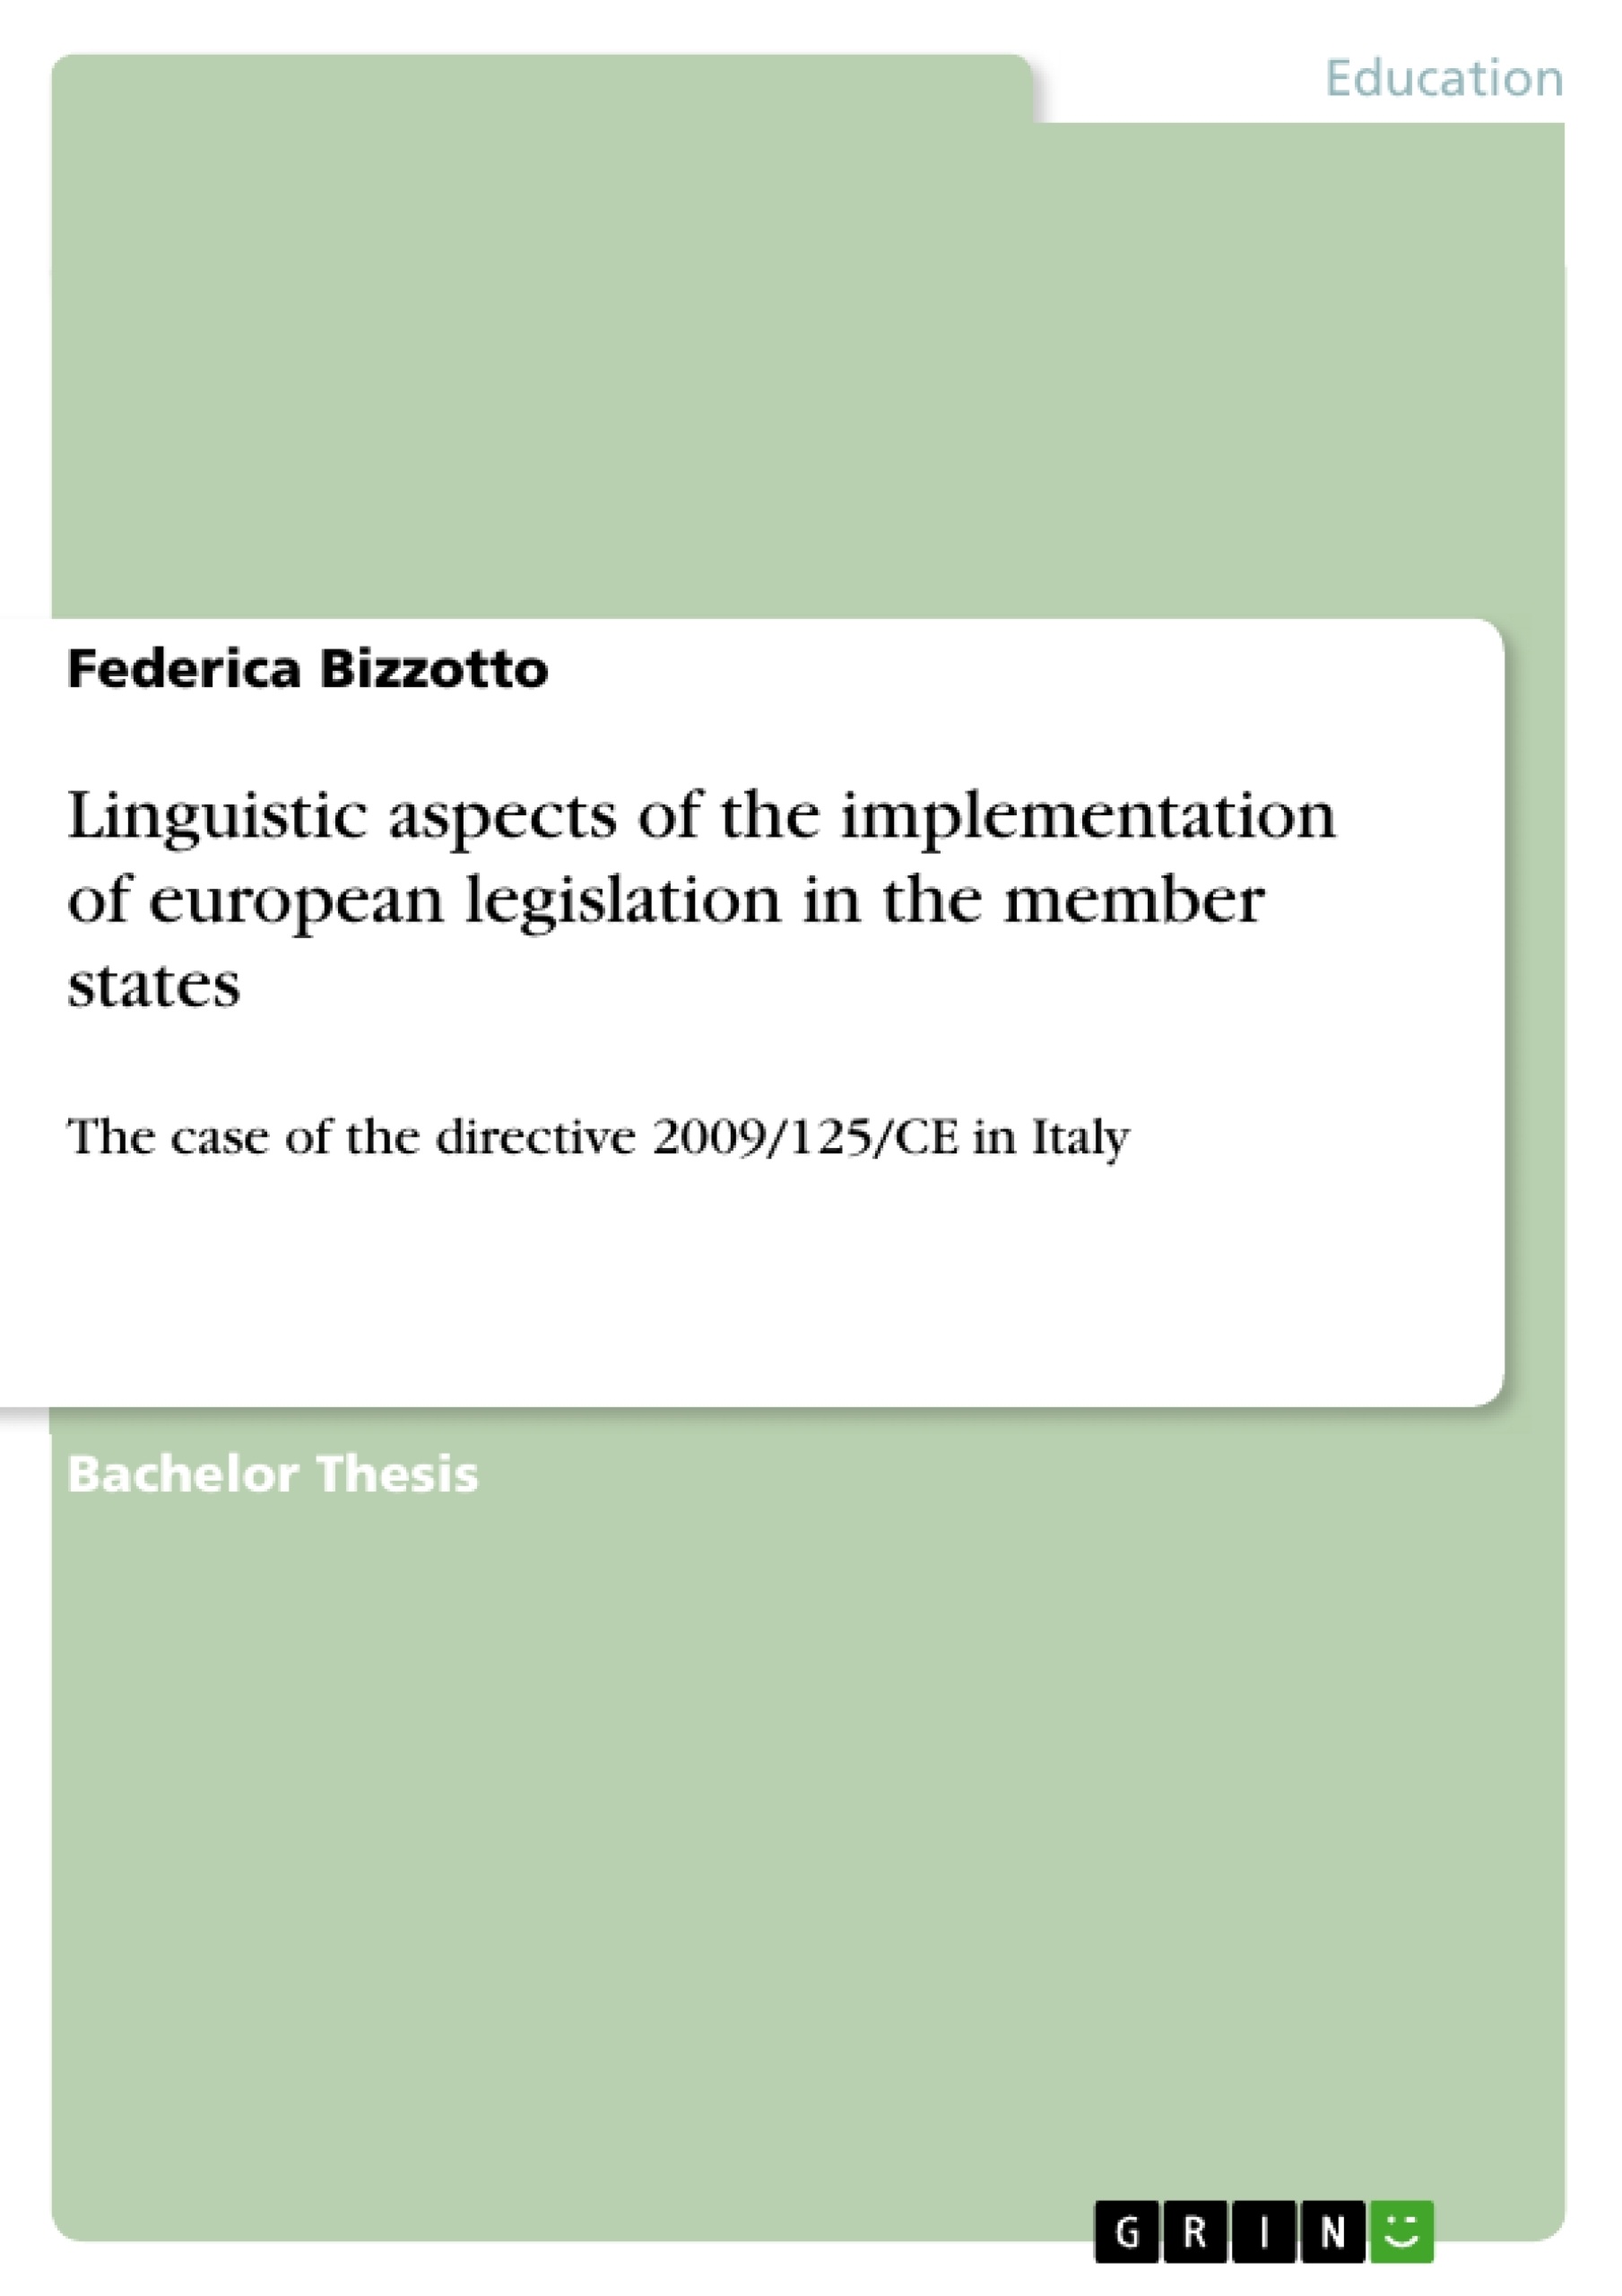 Título: Linguistic aspects of the implementation of european legislation in the member states